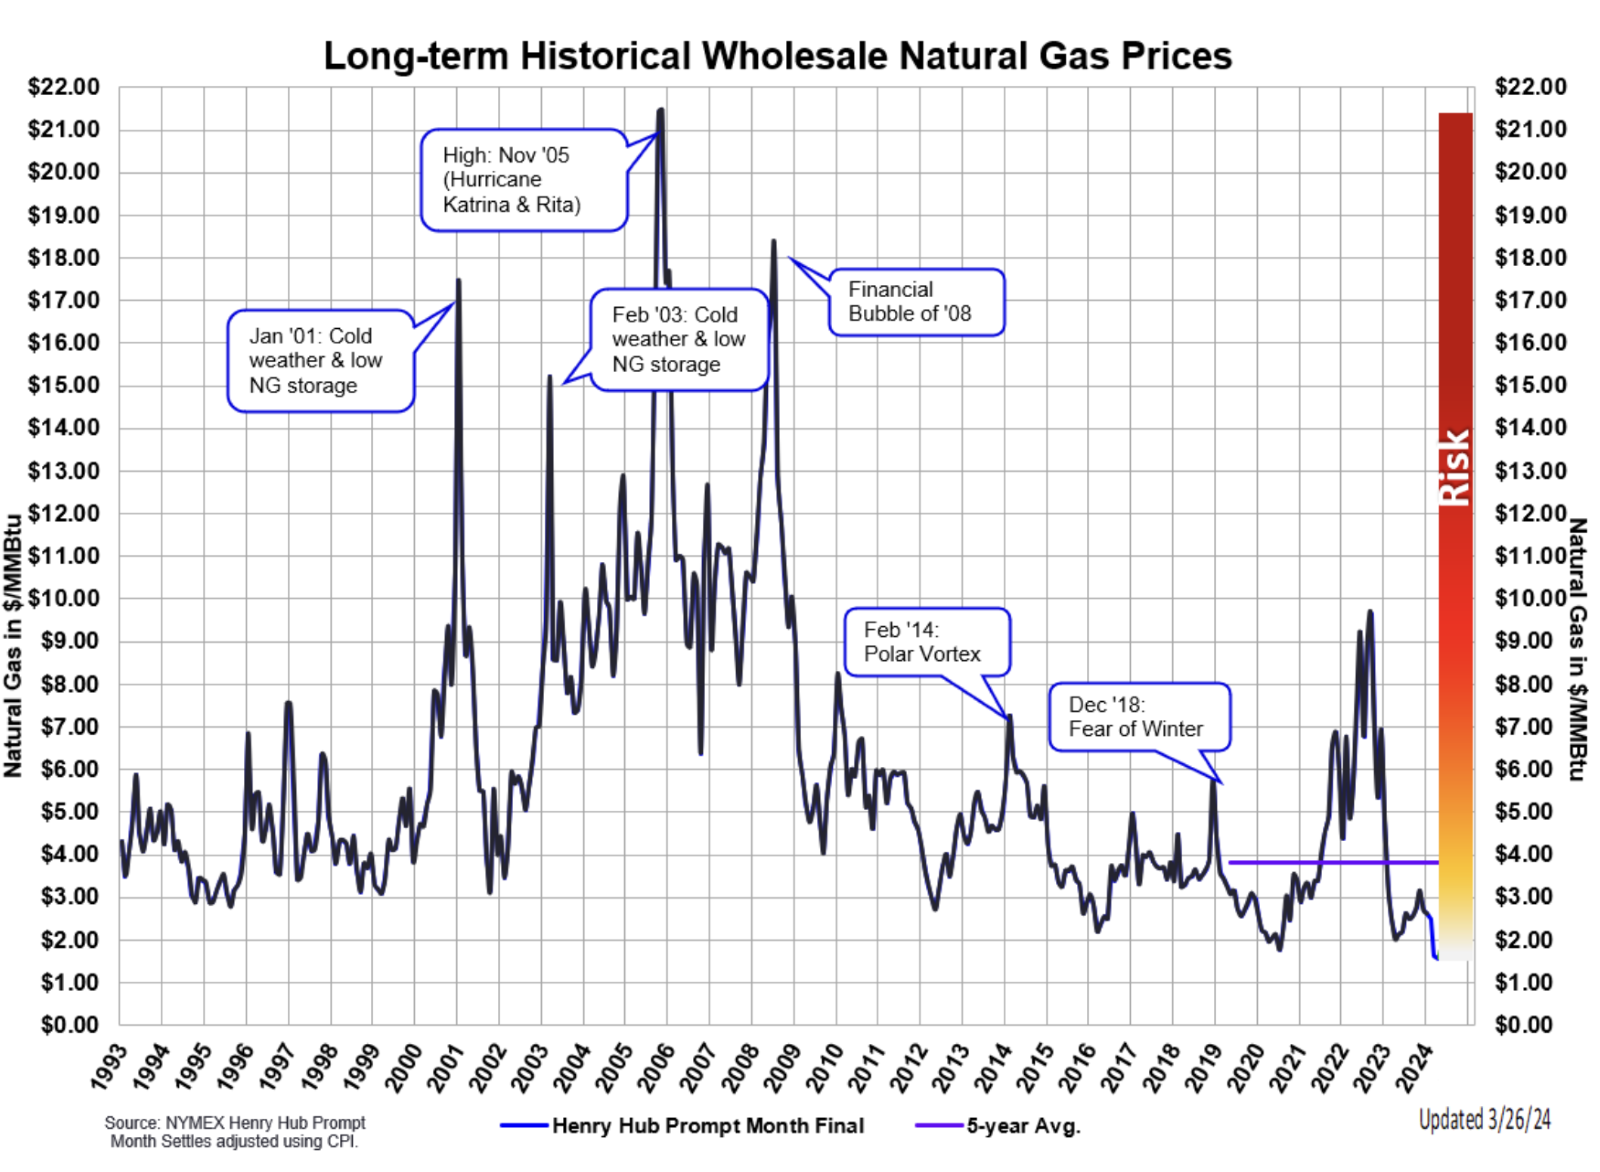 Graph of natural gas prices

Description automatically generated